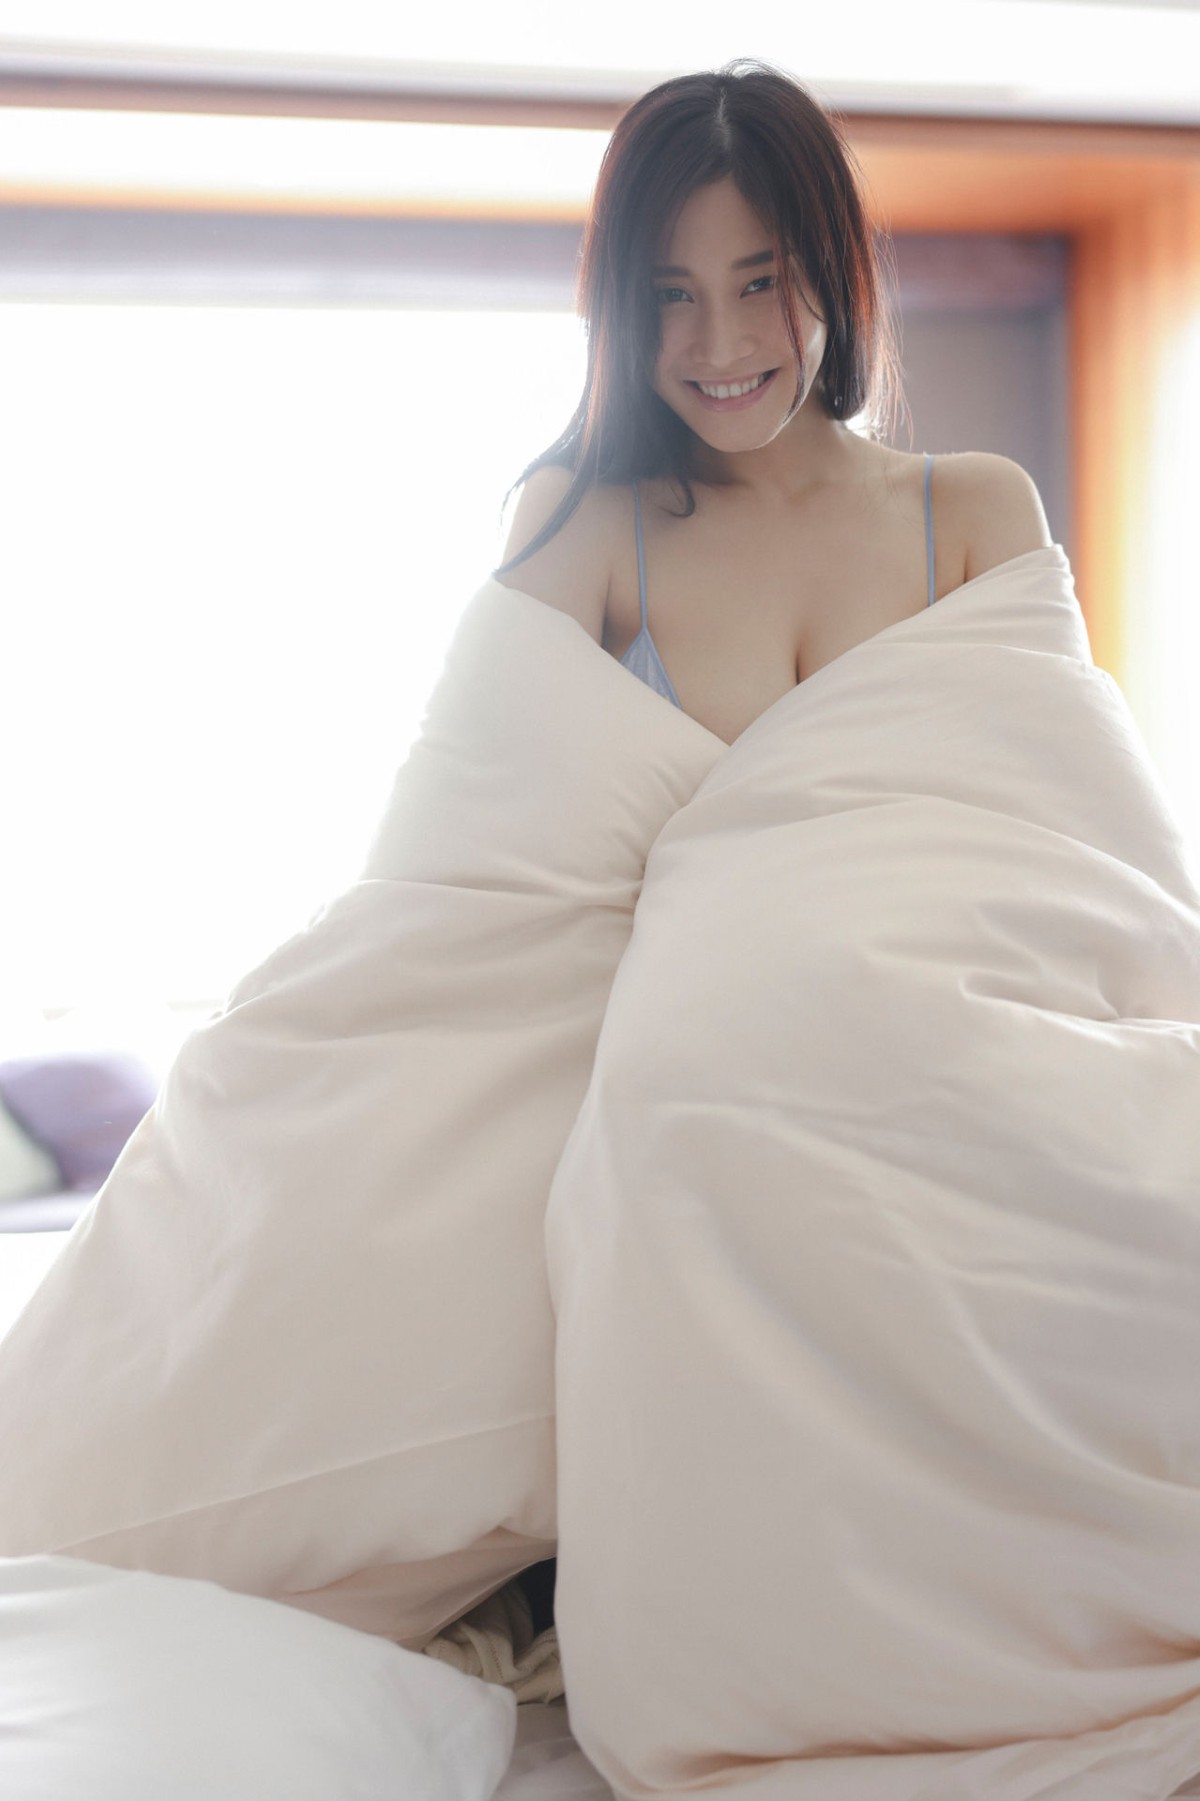 FRIDAY Digital Photobook 2023 02 10 Rin Takahashi 高橋凛 In A Suite Room With An I Cup Beauty Vol 2 0074 5552619229.jpg